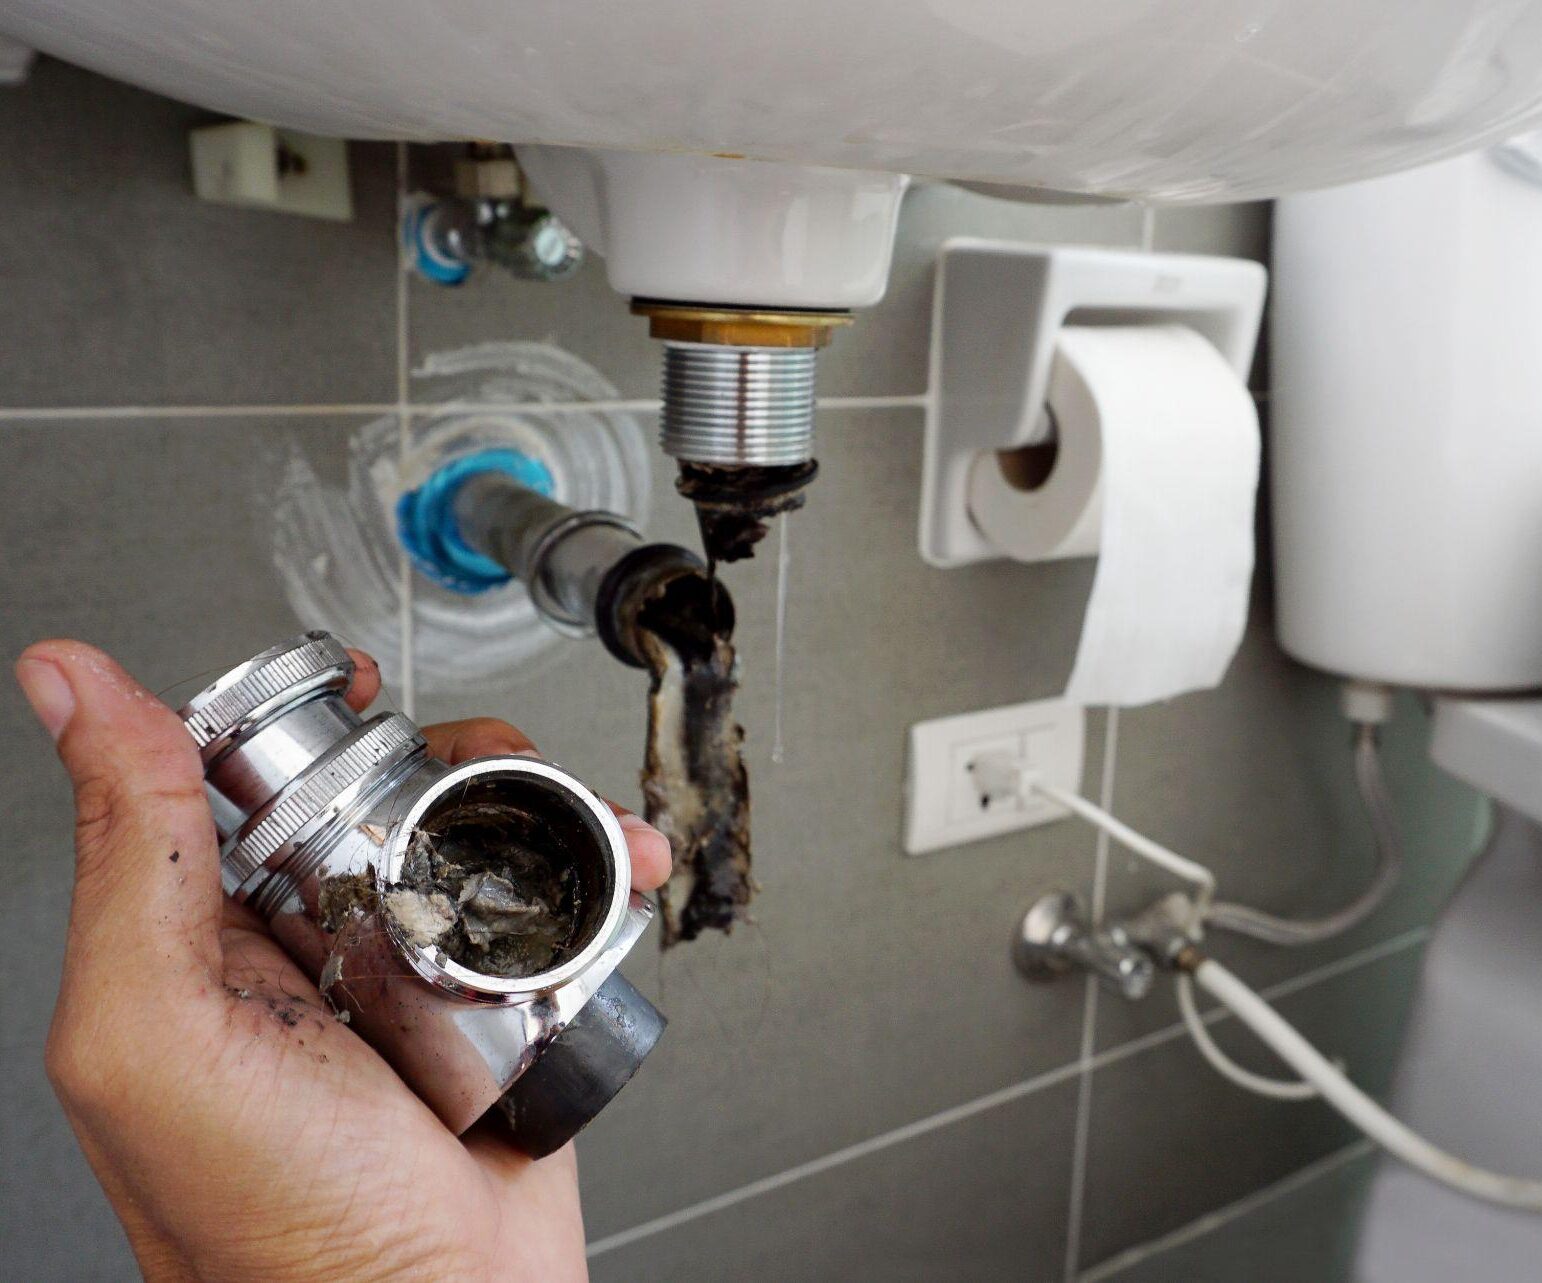 Hand Of Plumber Holding Joints And Connections Of Basin Or Sink In A Bathroom